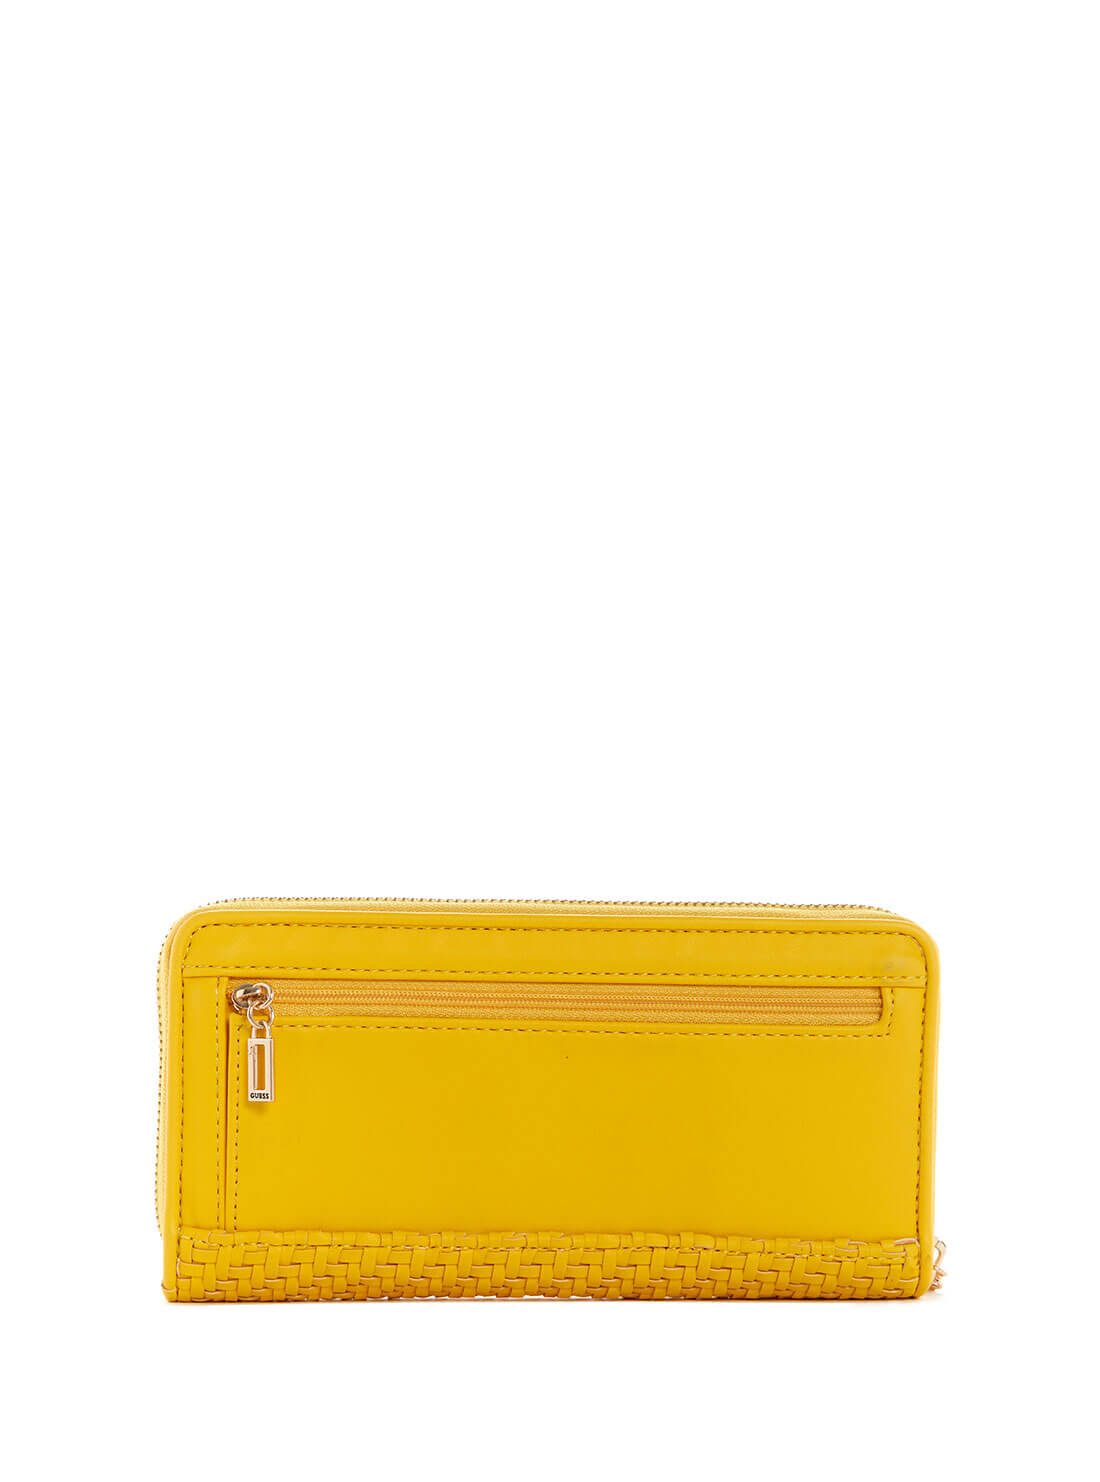 GUESS Womens Lemon Yellow Woven Hassie Large Wallet VG839746 Back View